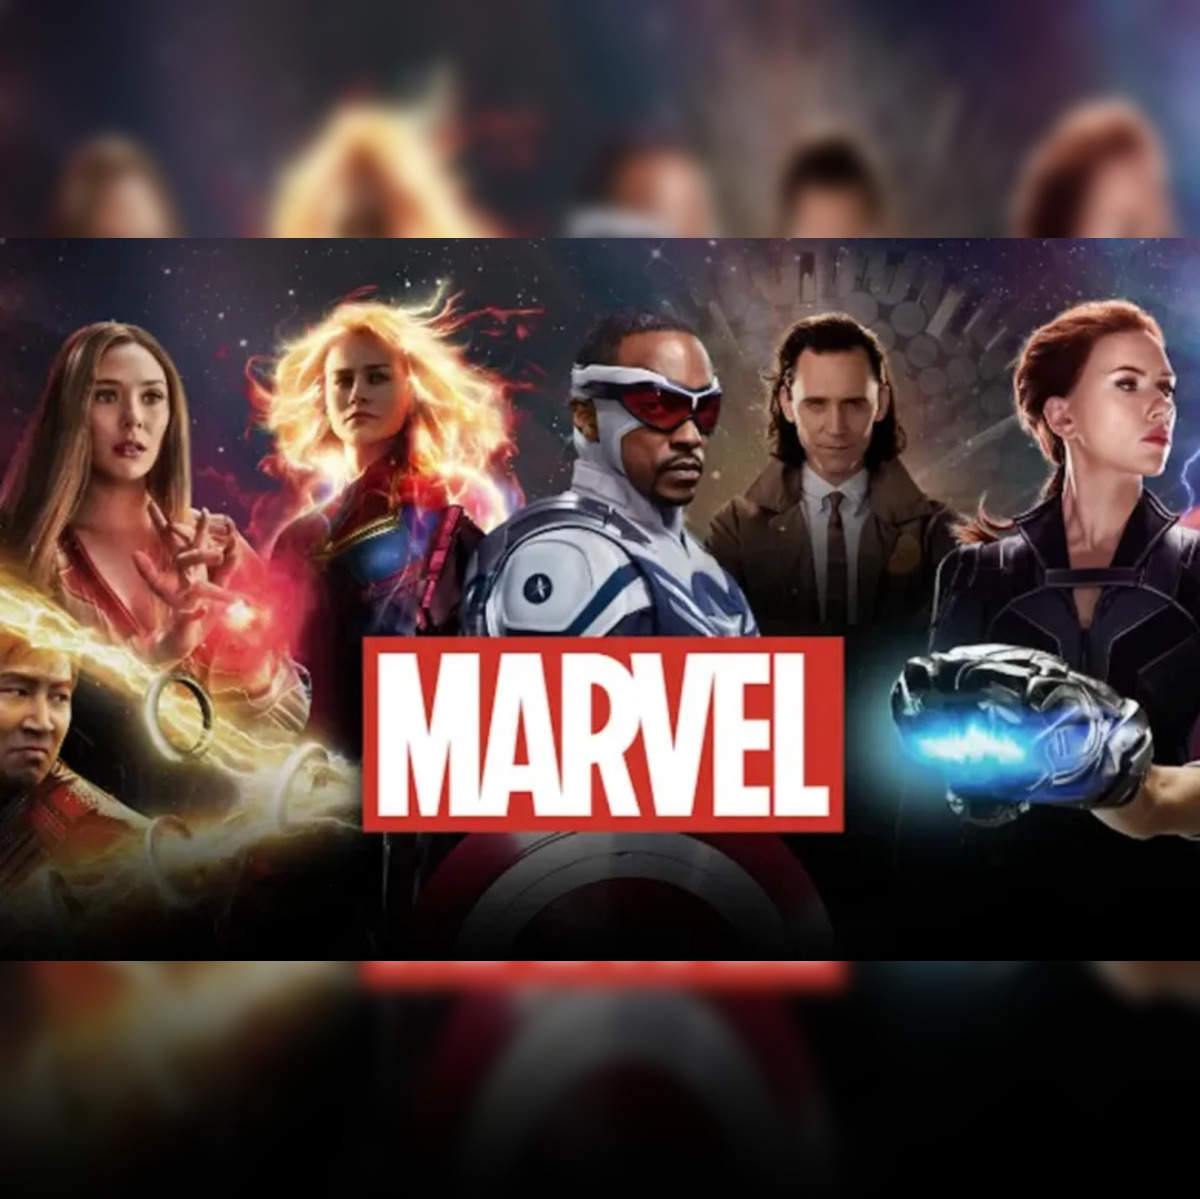 How to Watch 'The Marvels' Now - Is the New MCU Film Streaming?